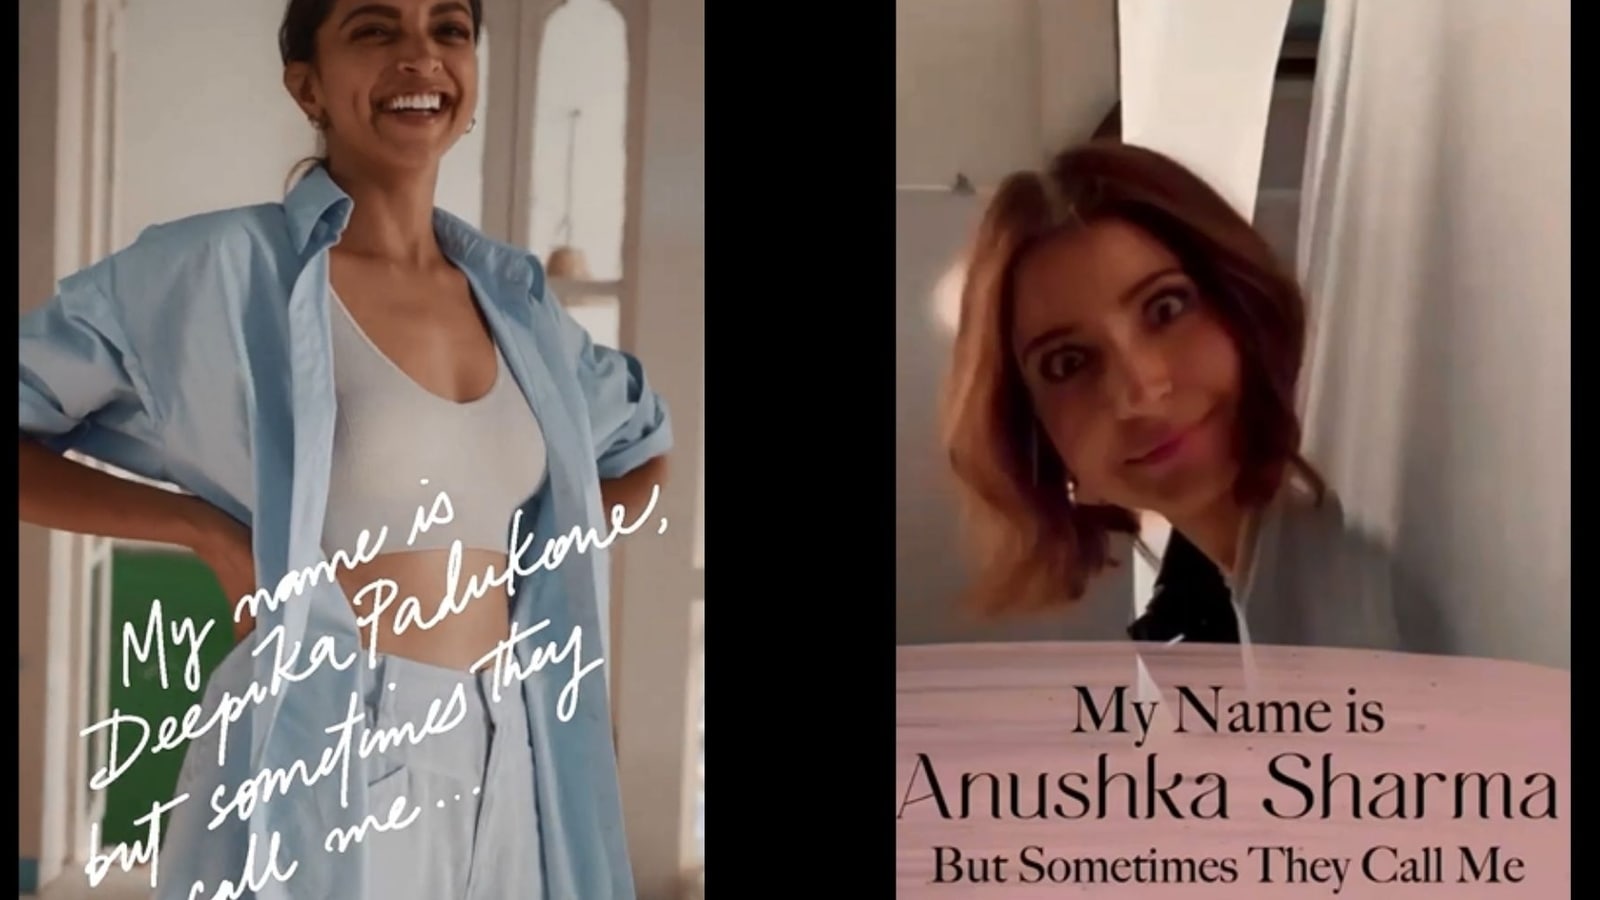 Anushaka Xxvideo - Bollywood actors take part in 'That's Not My Name' viral trend | Trending -  Hindustan Times